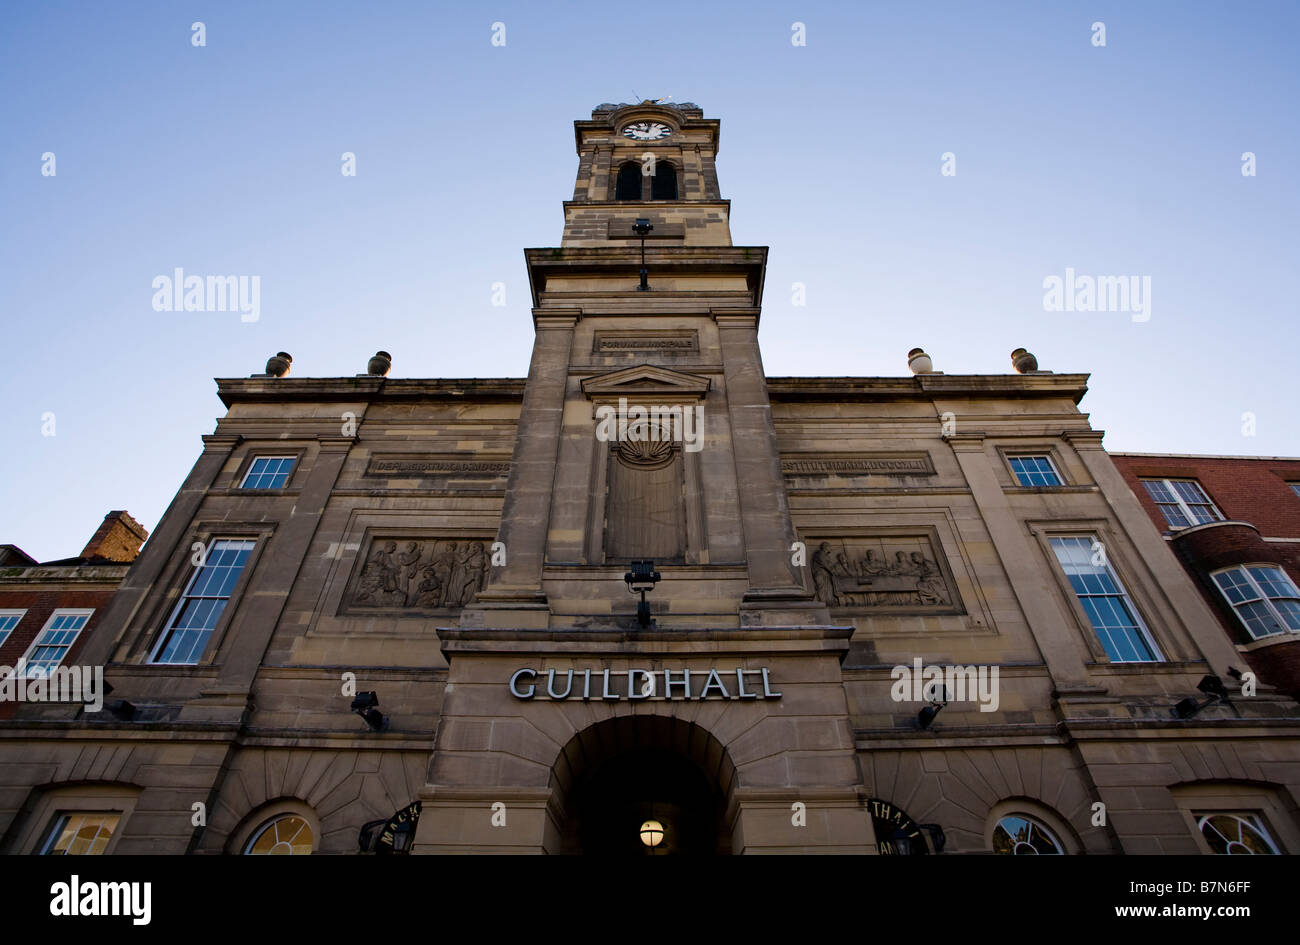 Derby Guildhall Building, the centrepiece of the Market Square, Derby, England. Stock Photo